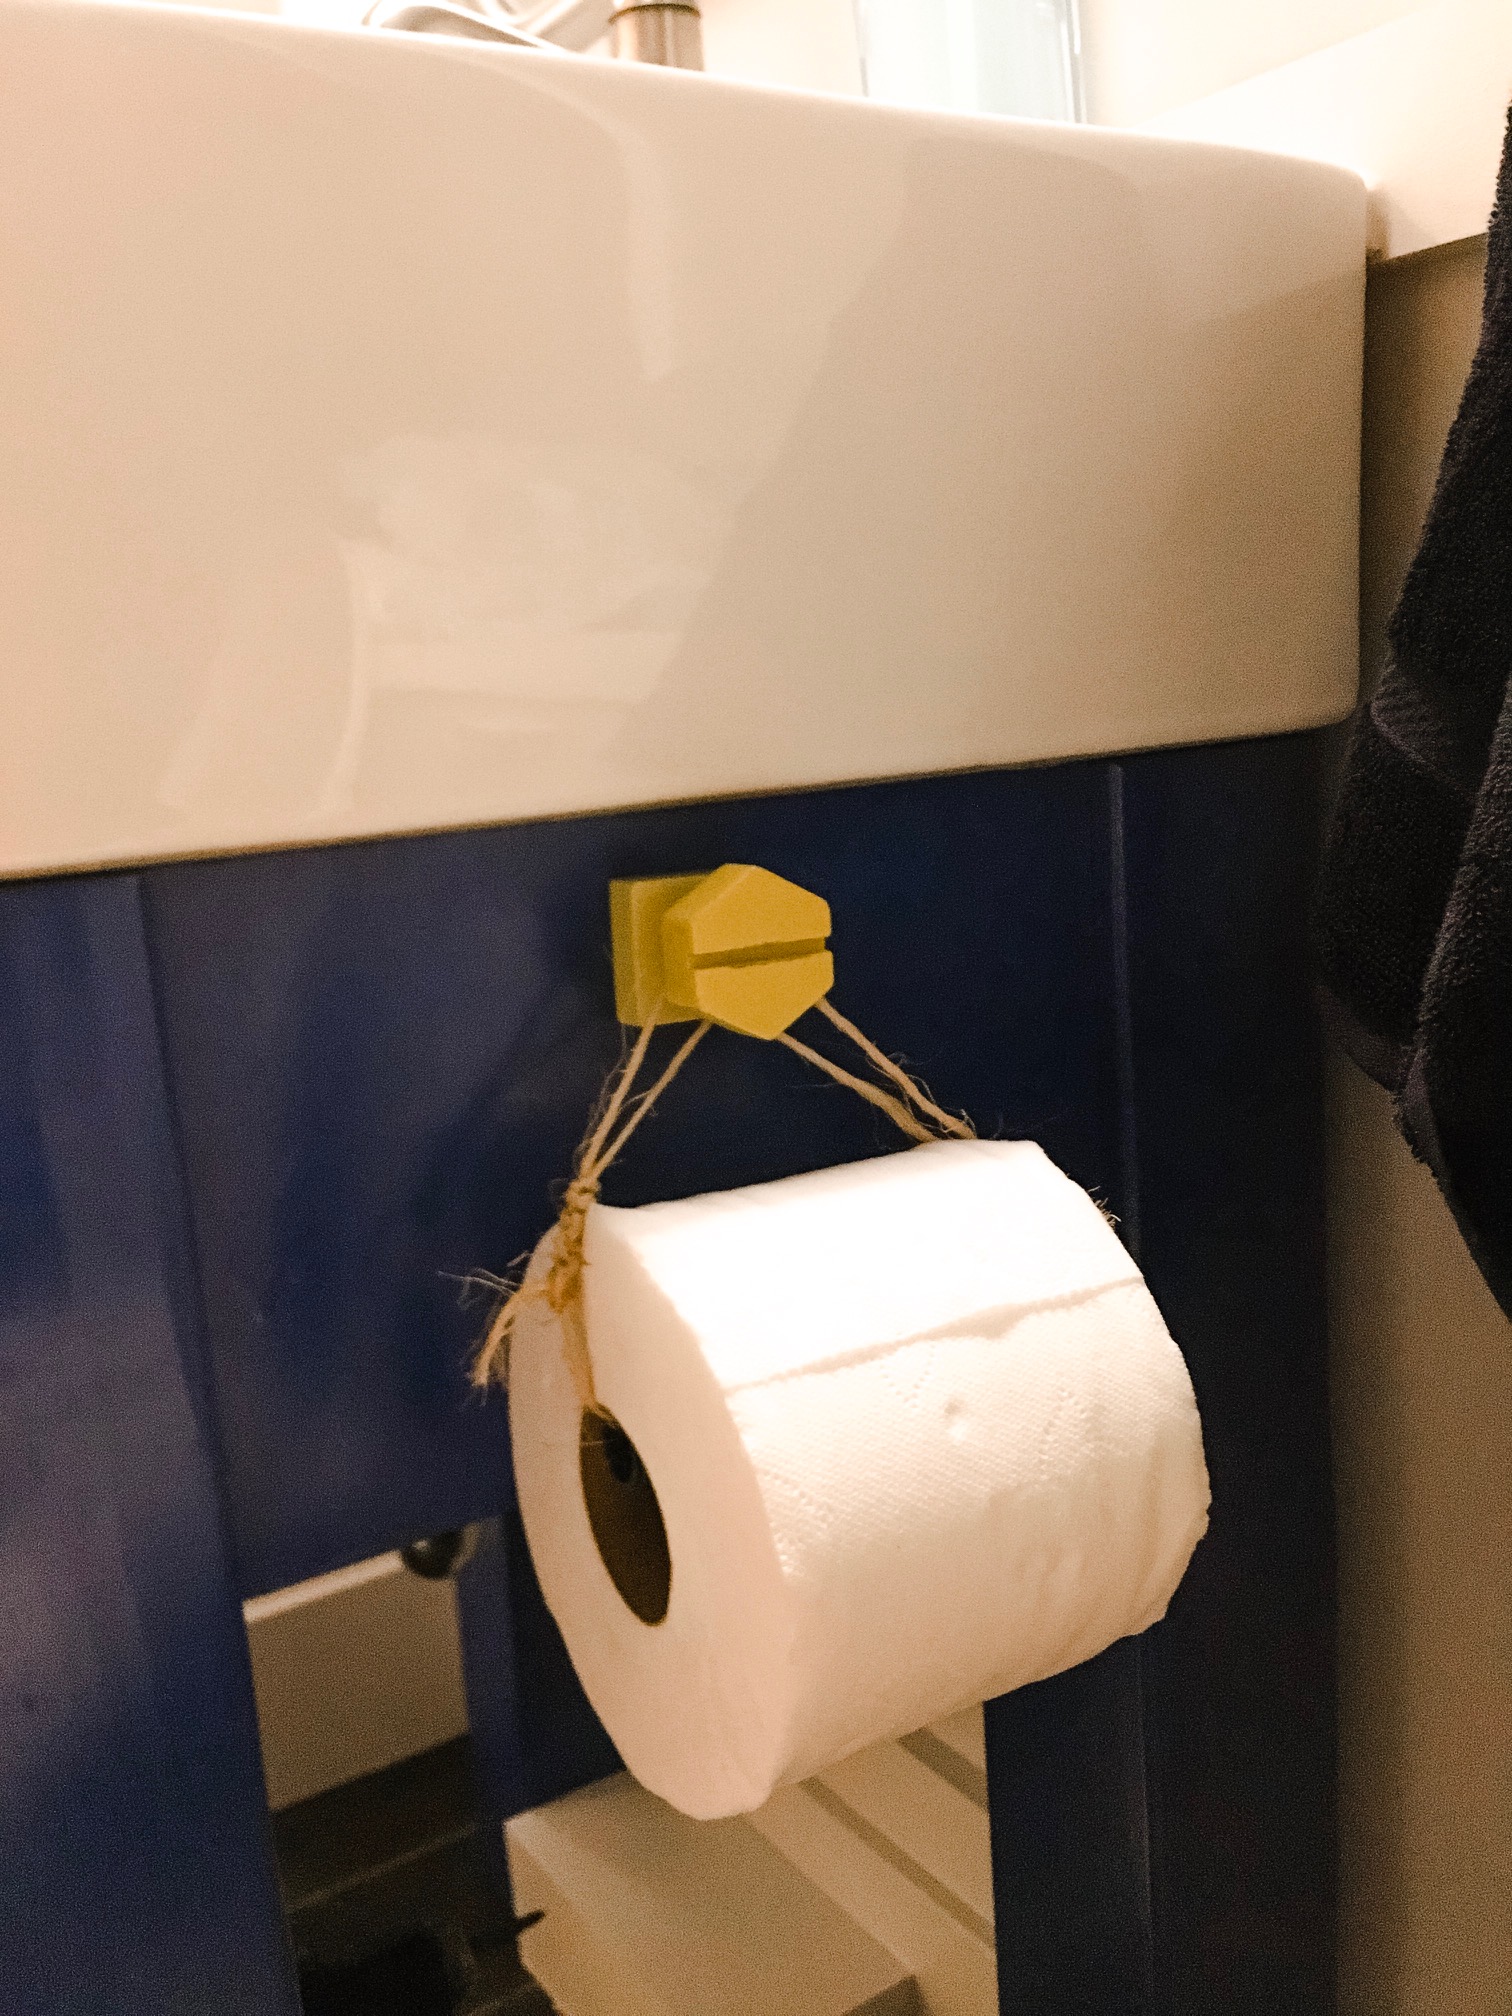 toy bolt repurposed as a toilet paper roll holder was a custom and cute addition to this quick and easy boy bathroom remodel